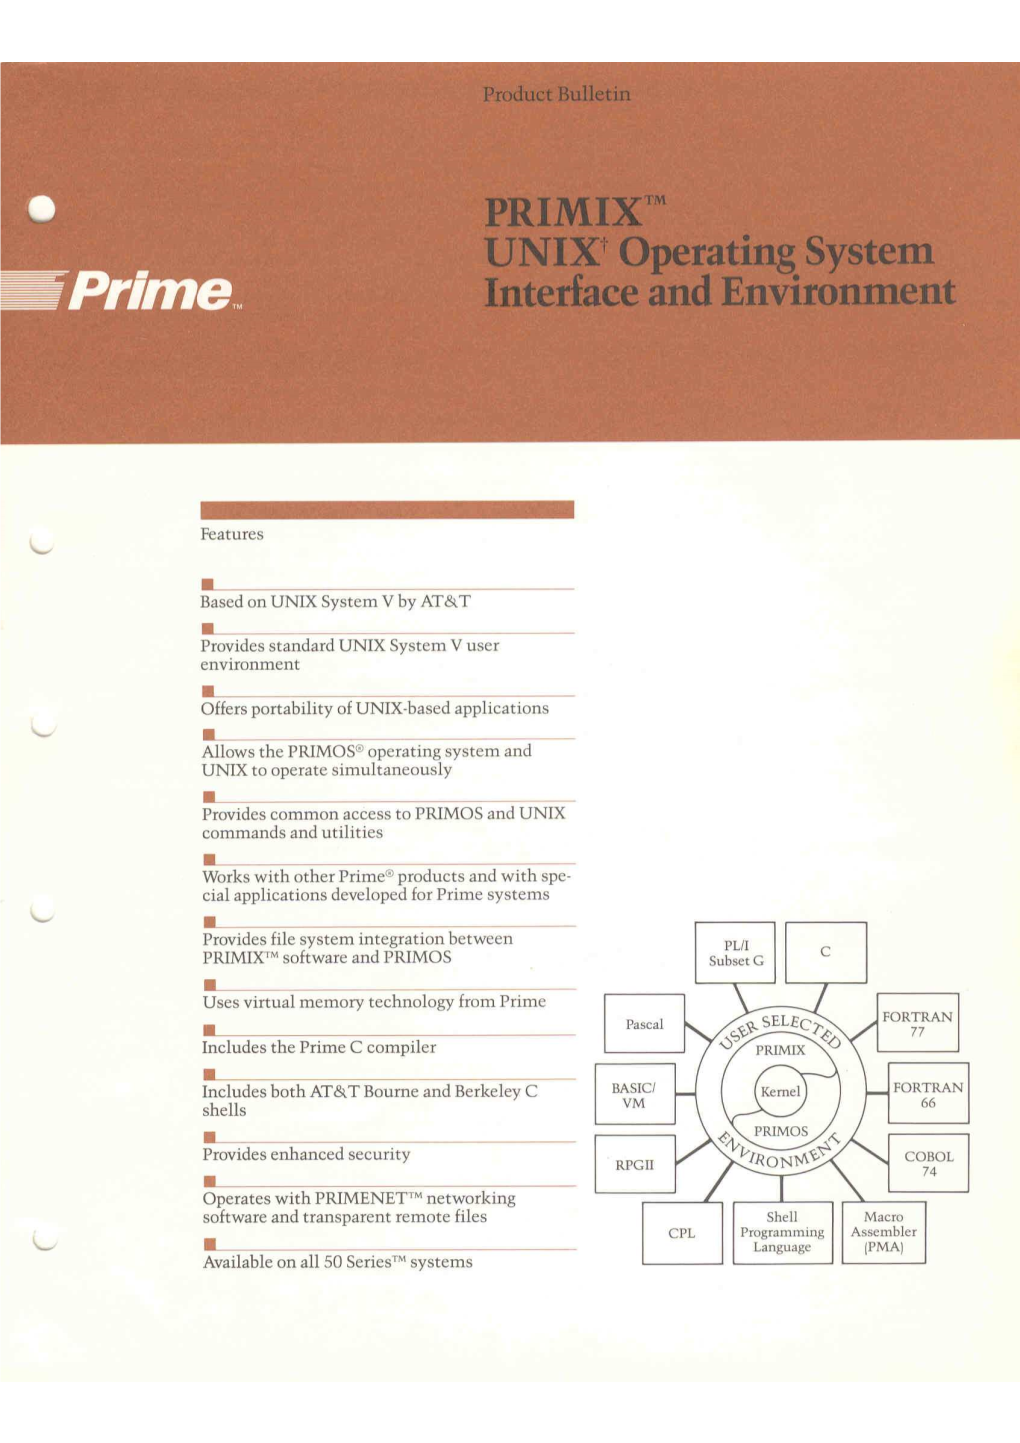 PRIMIX UNIX Operating System Interface and Environment